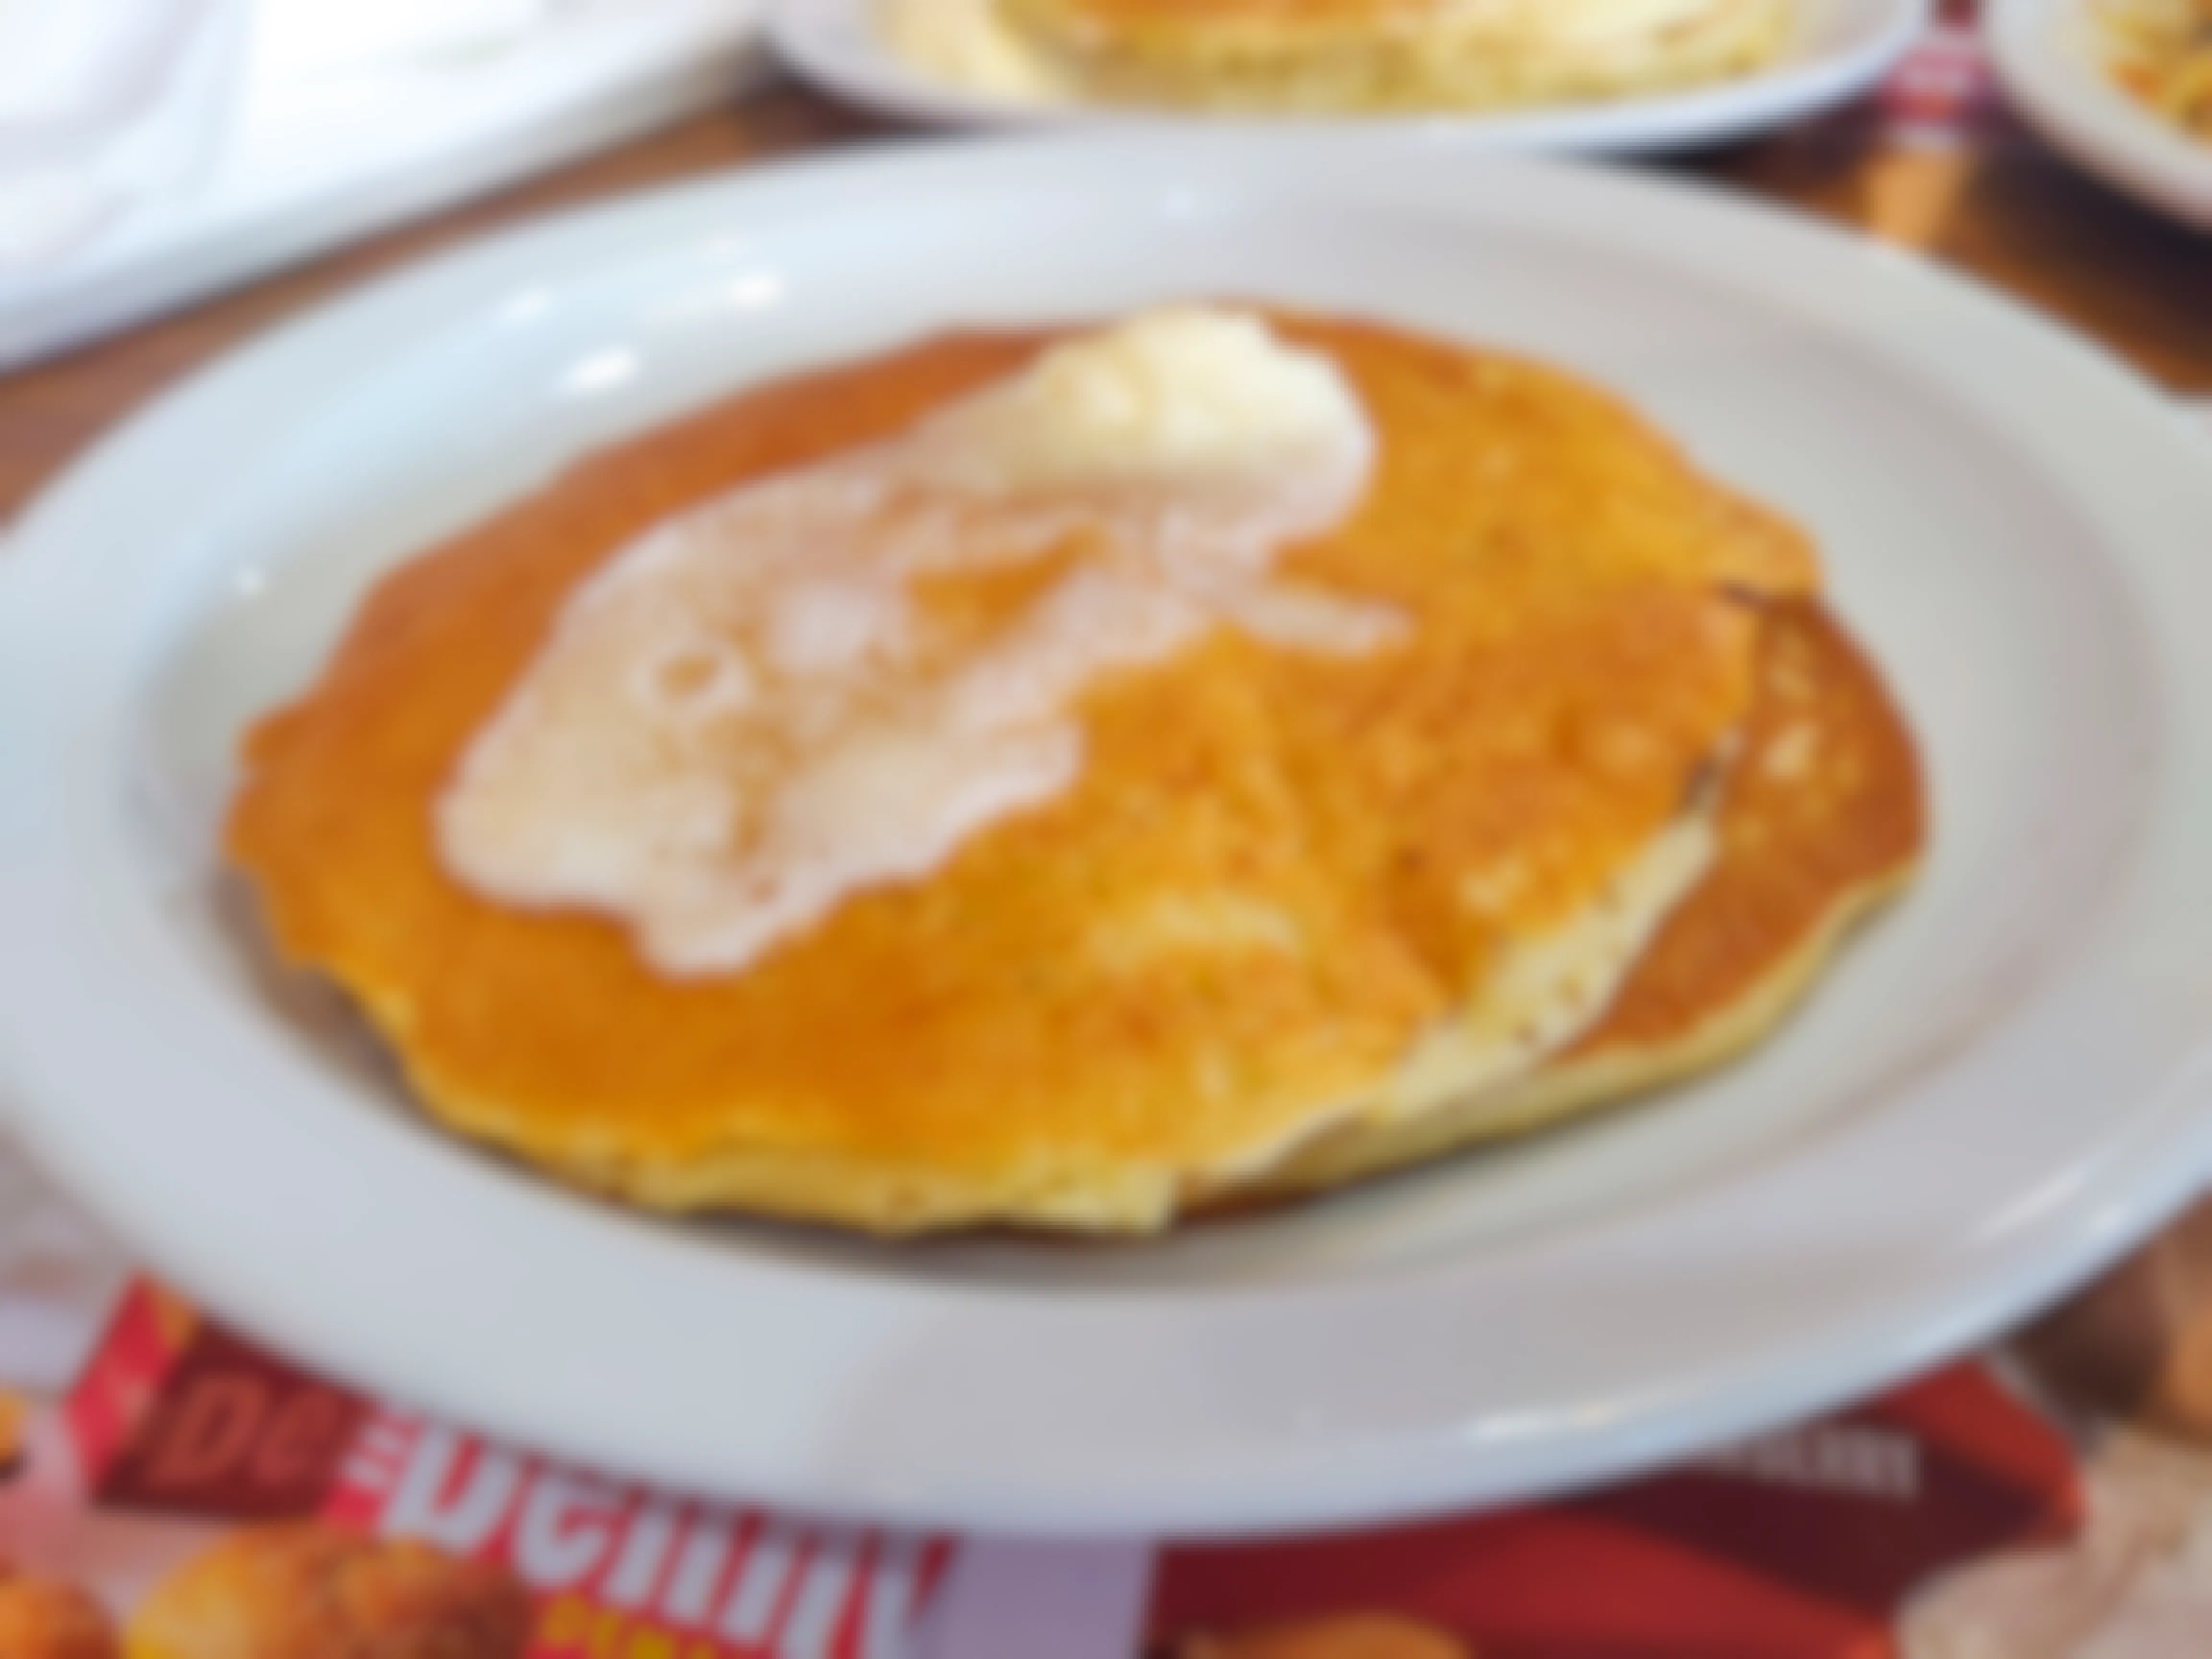 A plate of Denny's pancakes on a table at Denny's.